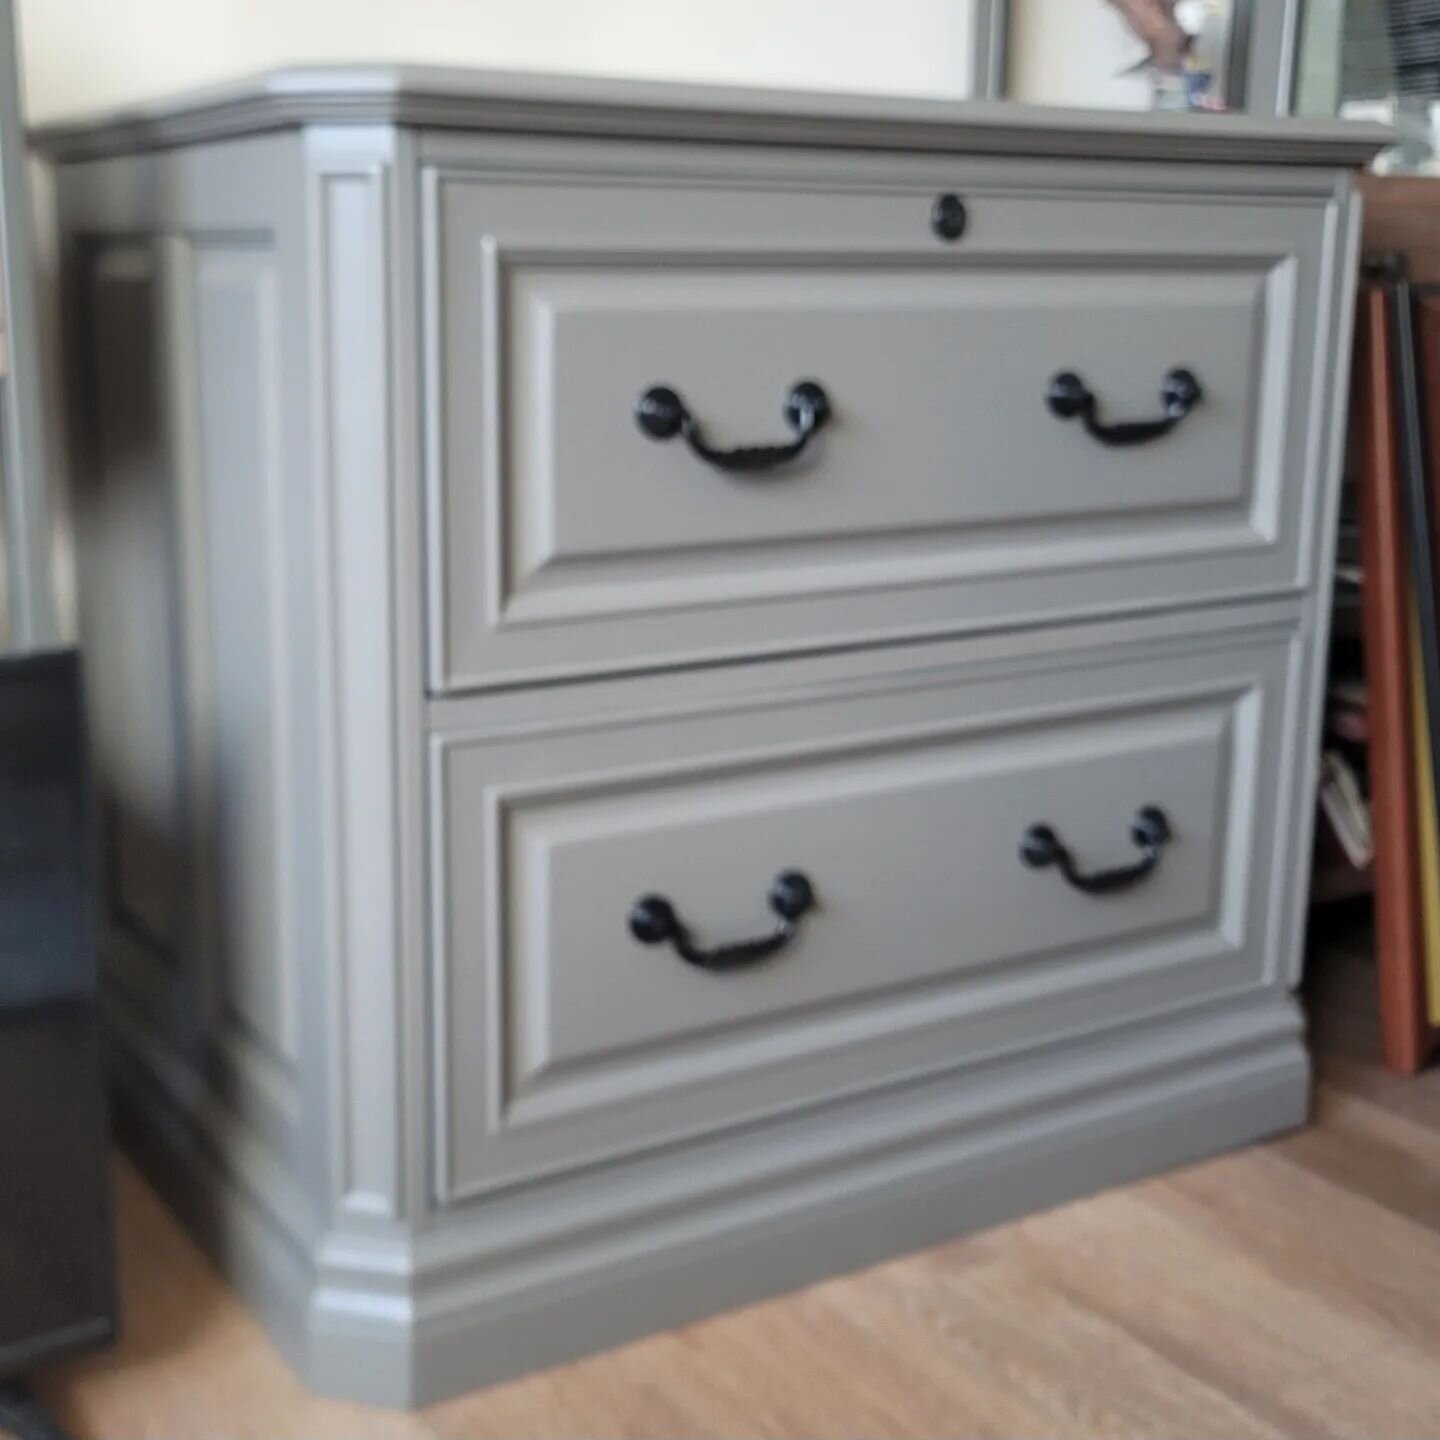 One of this week's projects was this file cabinet done in &quot;Gauntlet Grey&quot; satin sheen. Flip through the photos to see what it looked like in process. Thanks for checking these out!

*The pictures are a little fuzzy. Funny thing is, I have p